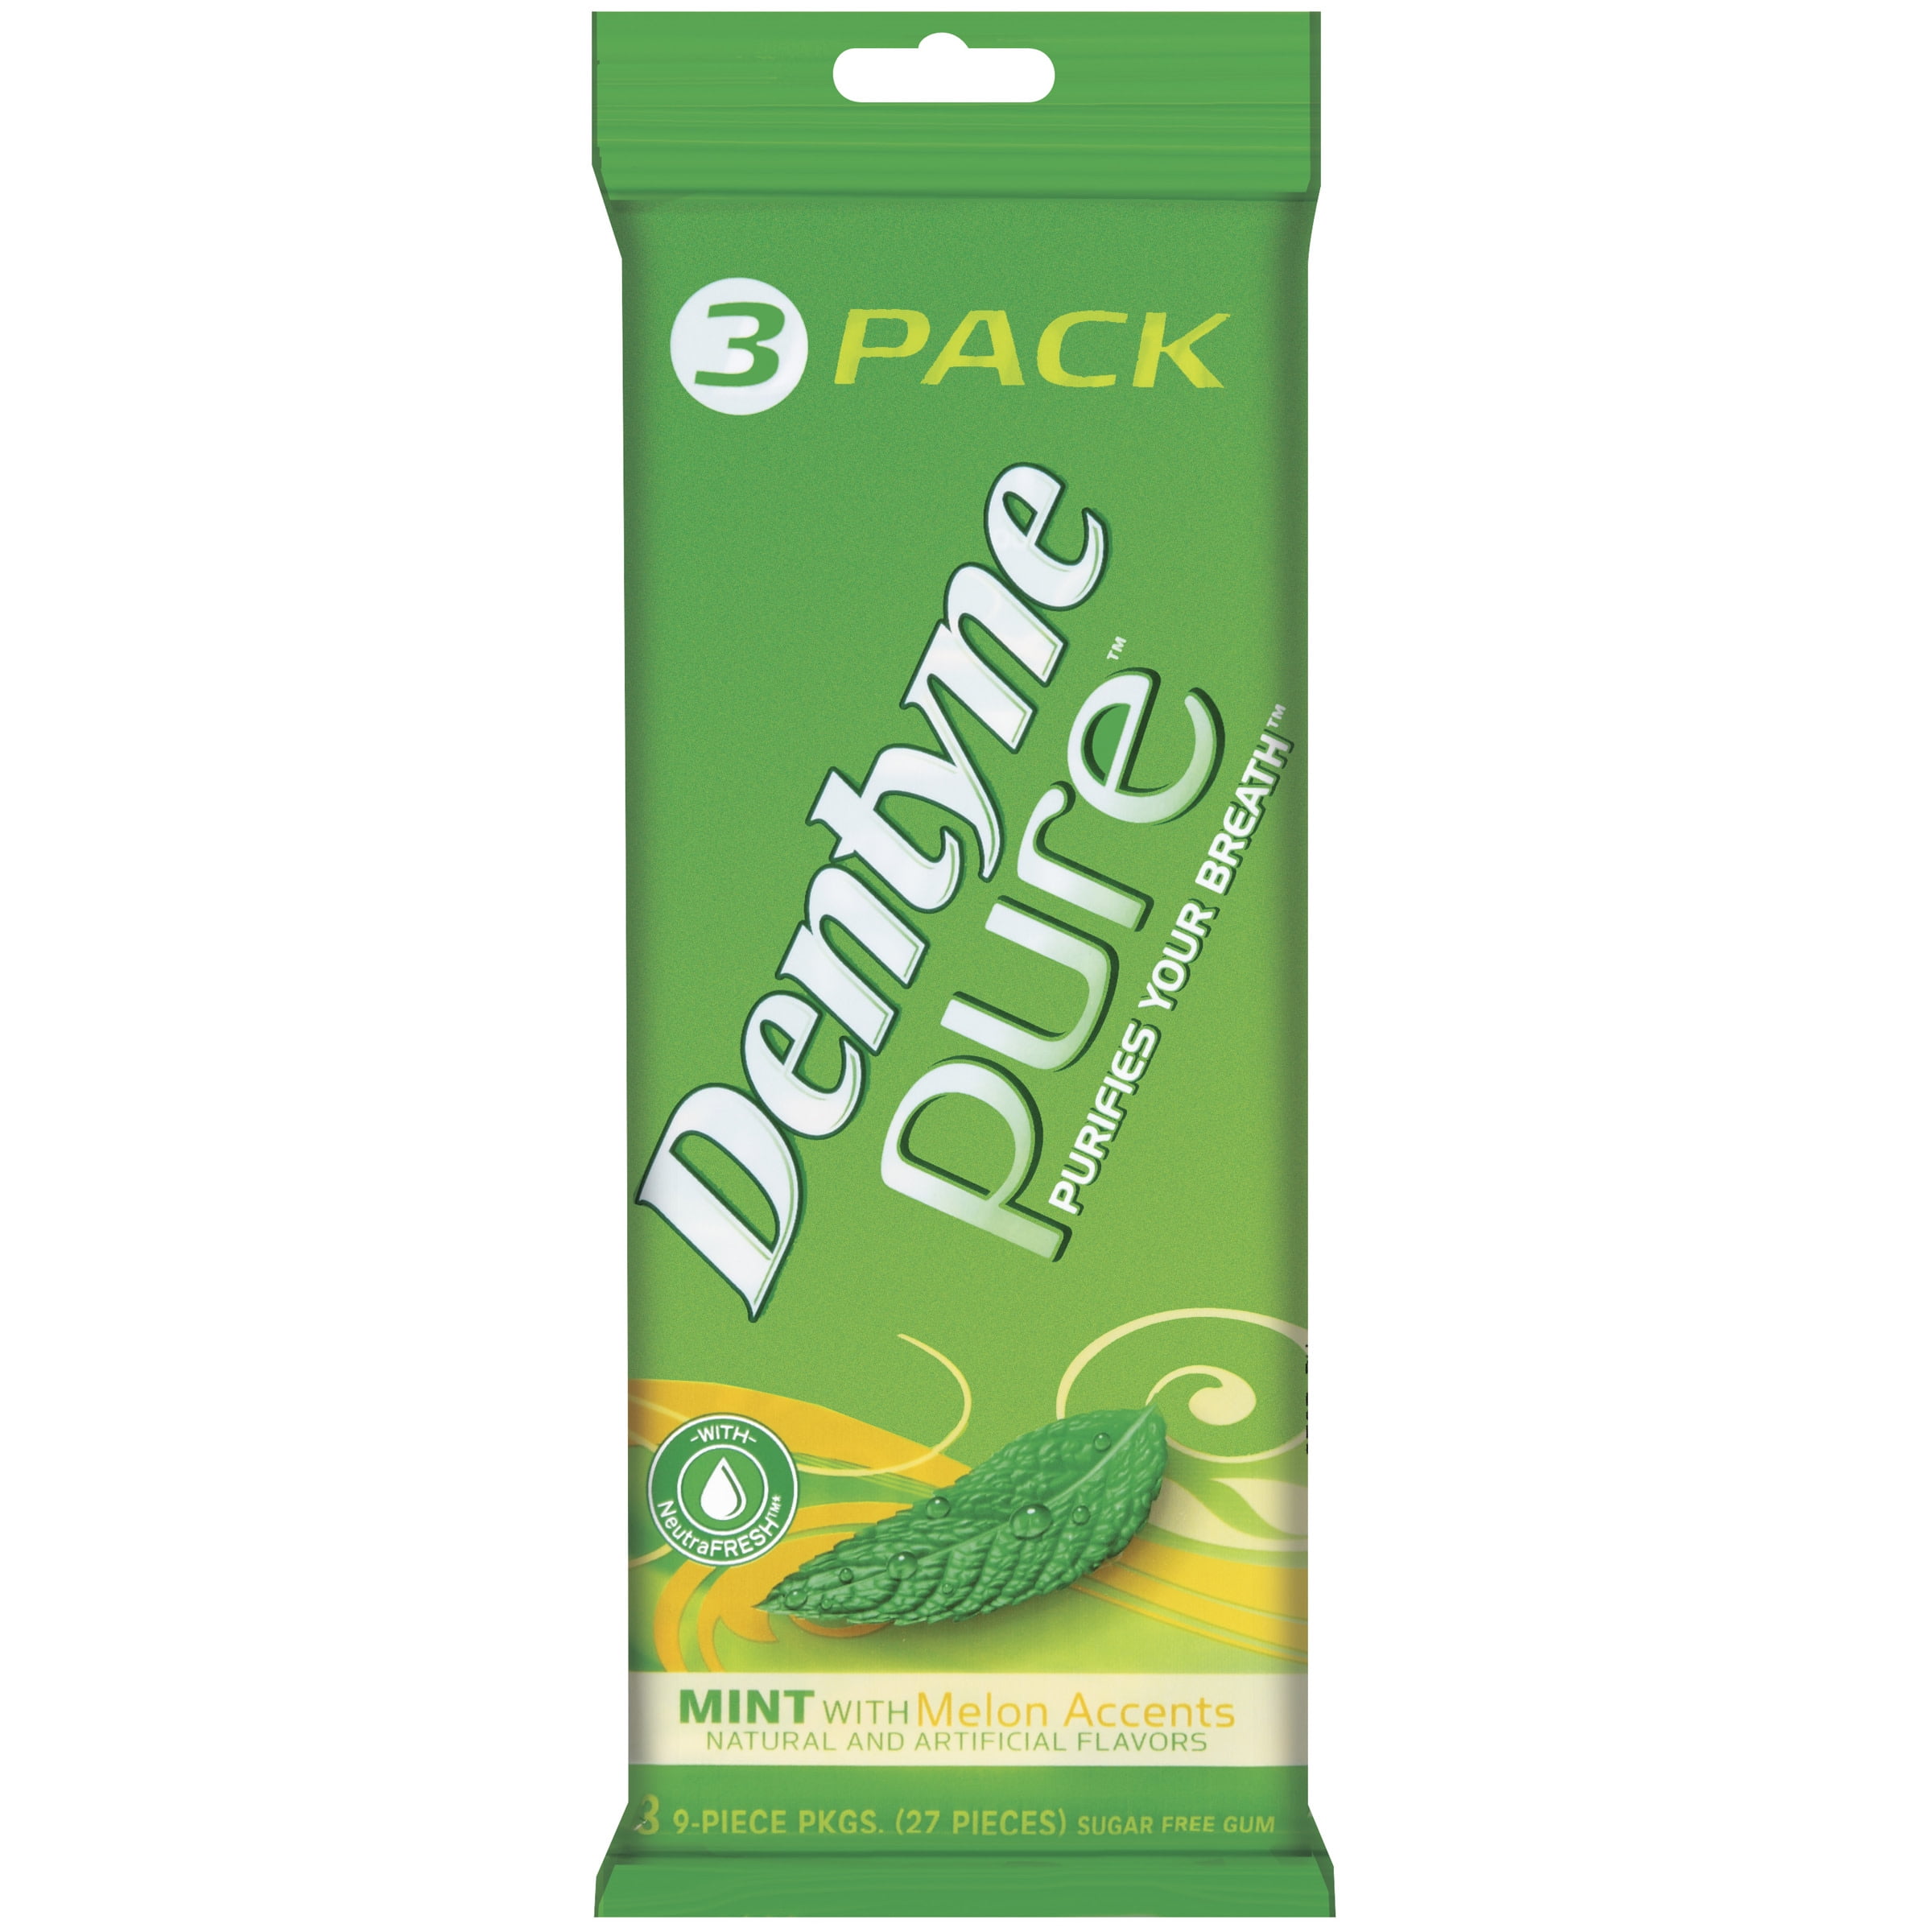 Dentyne Pure Mint with Melon Accents Sugar Free Gum, 3 Packs of 9 Pieces (27 Total Pieces)